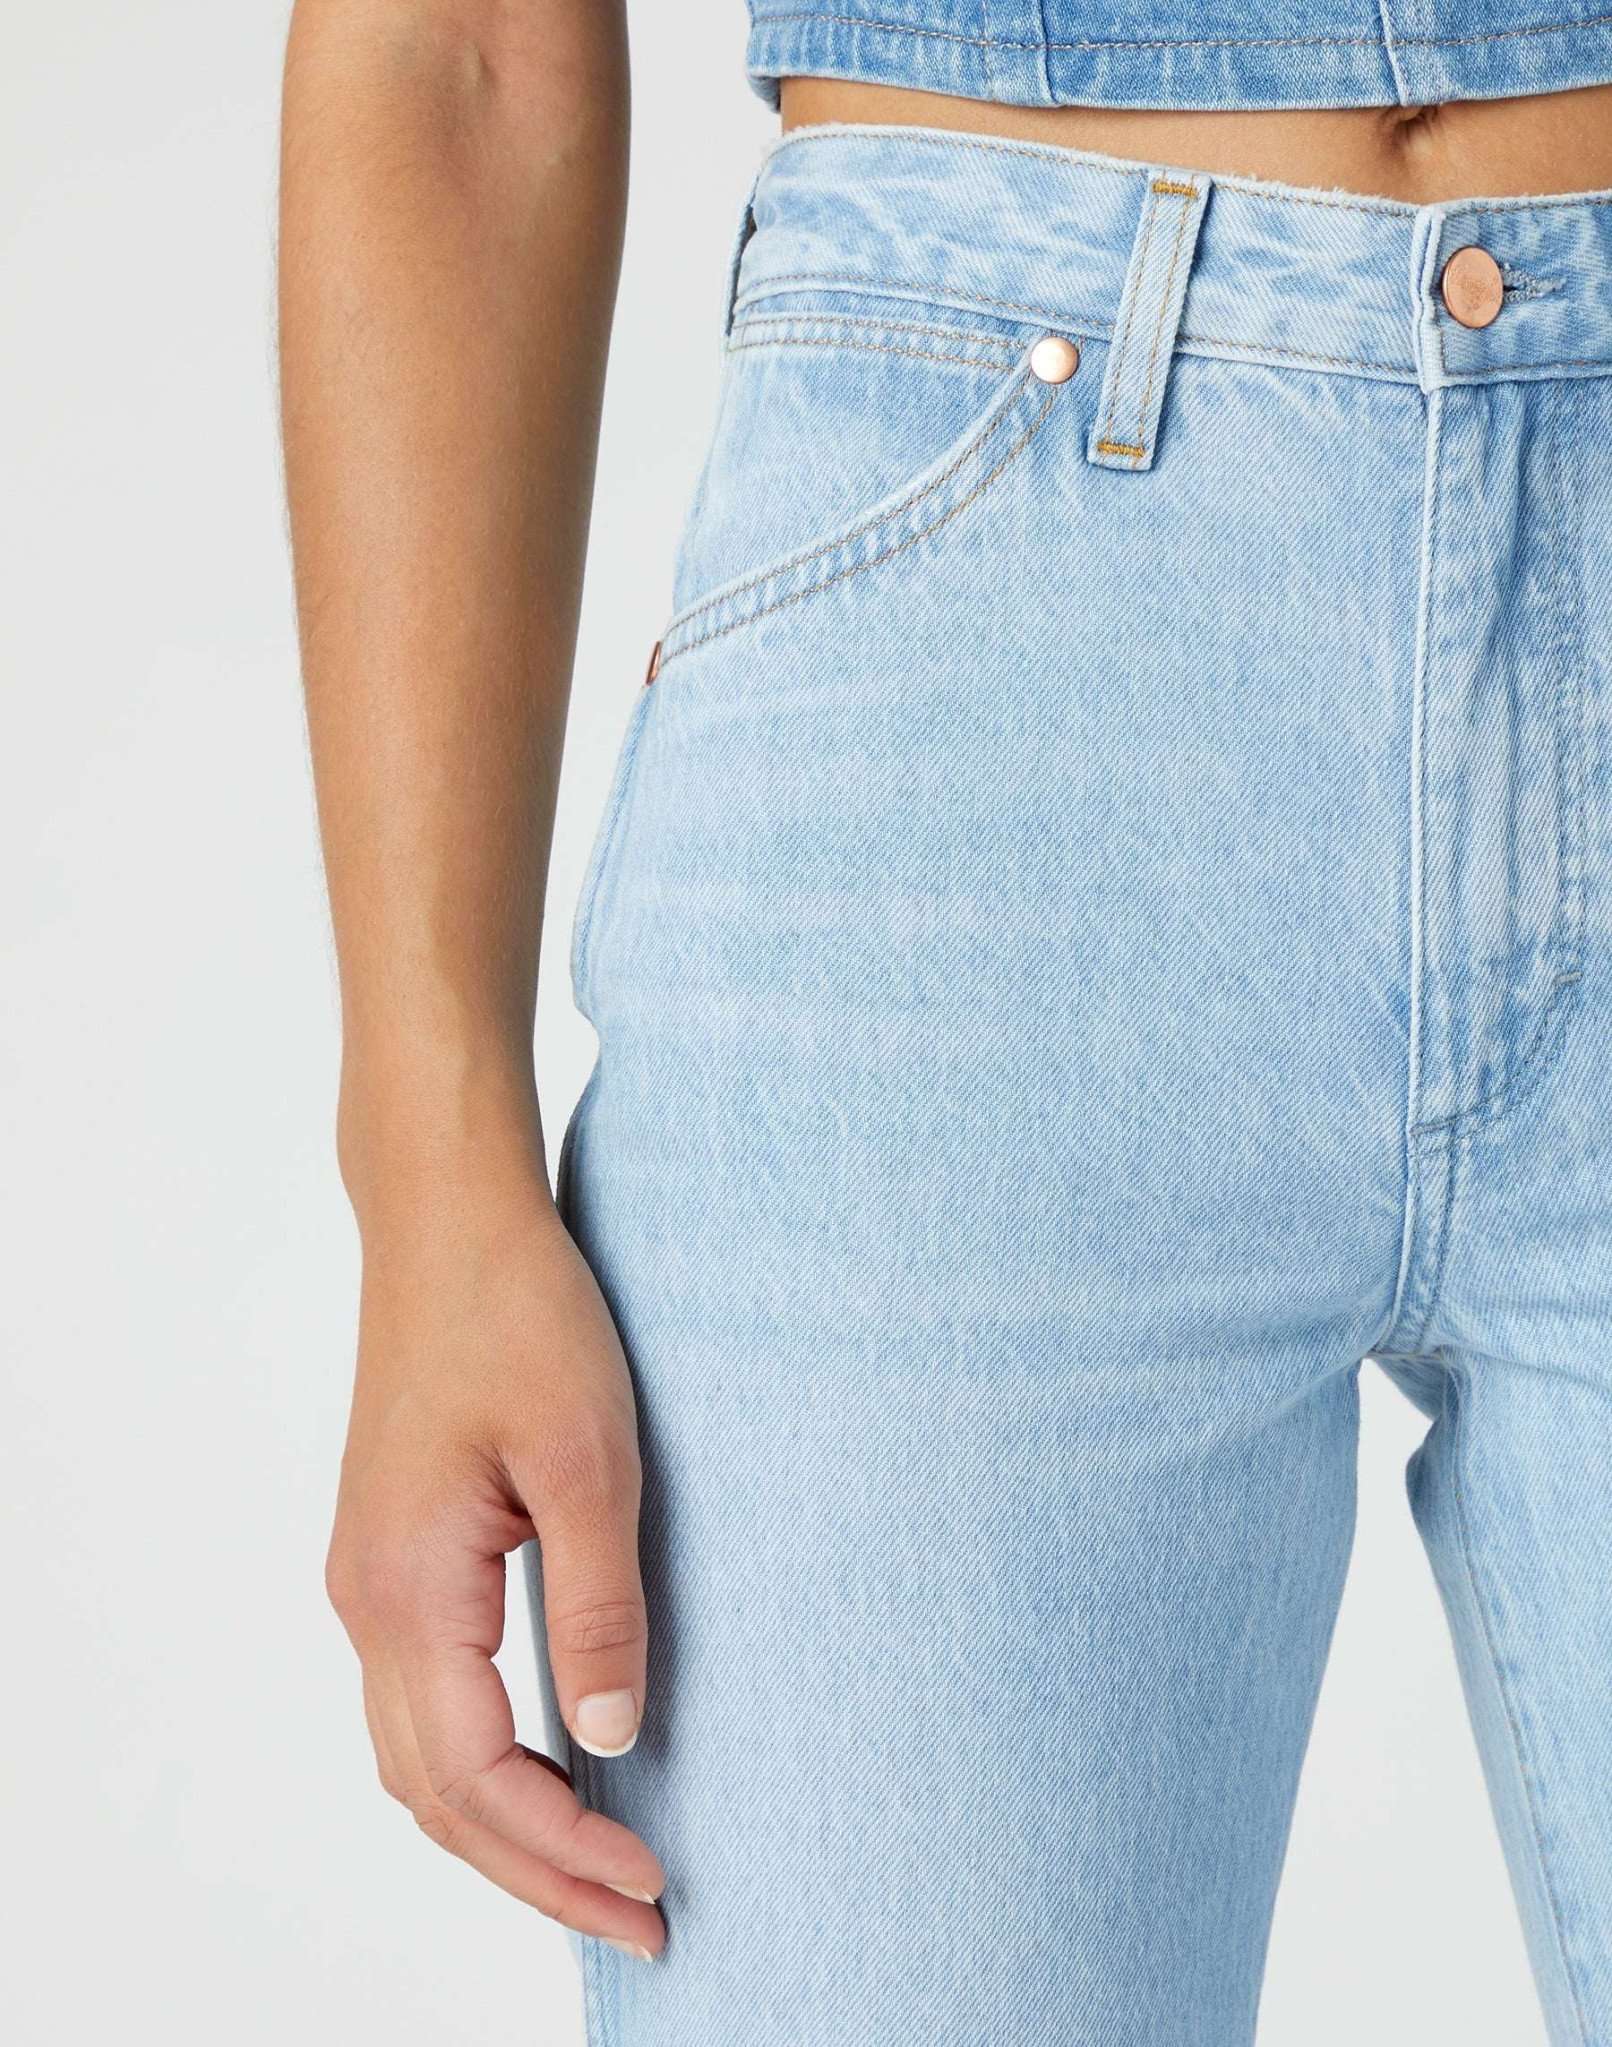 Wild West in Bad Intentions Jeans Wrangler   